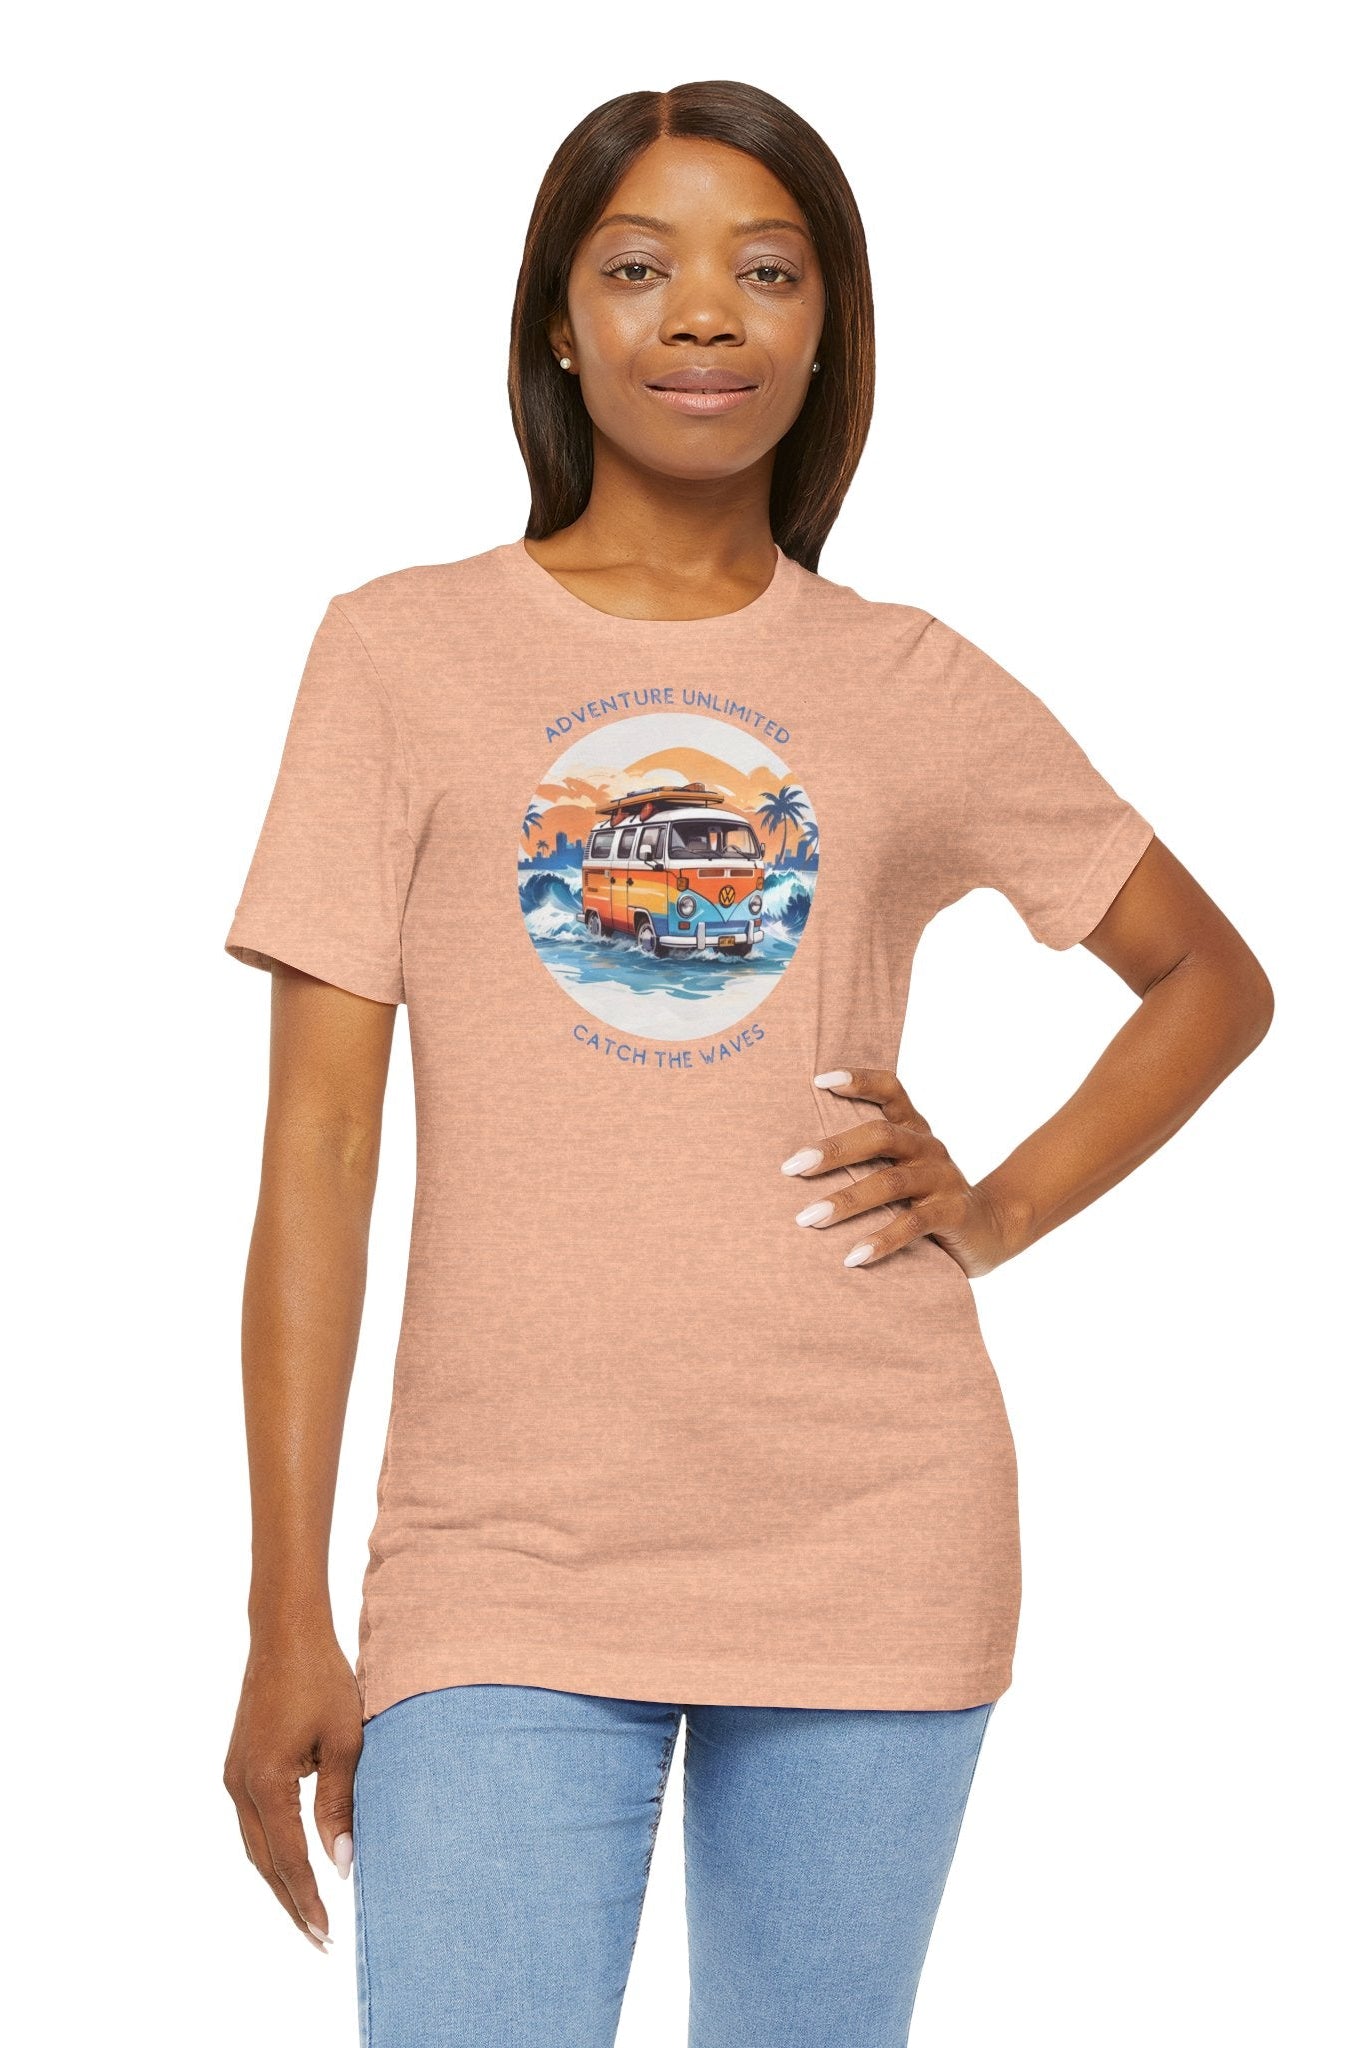 Adventure Unlimited Surfing T-Shirt: woman in peach tee with ’the best day is a day’ - direct-to-garment printed item